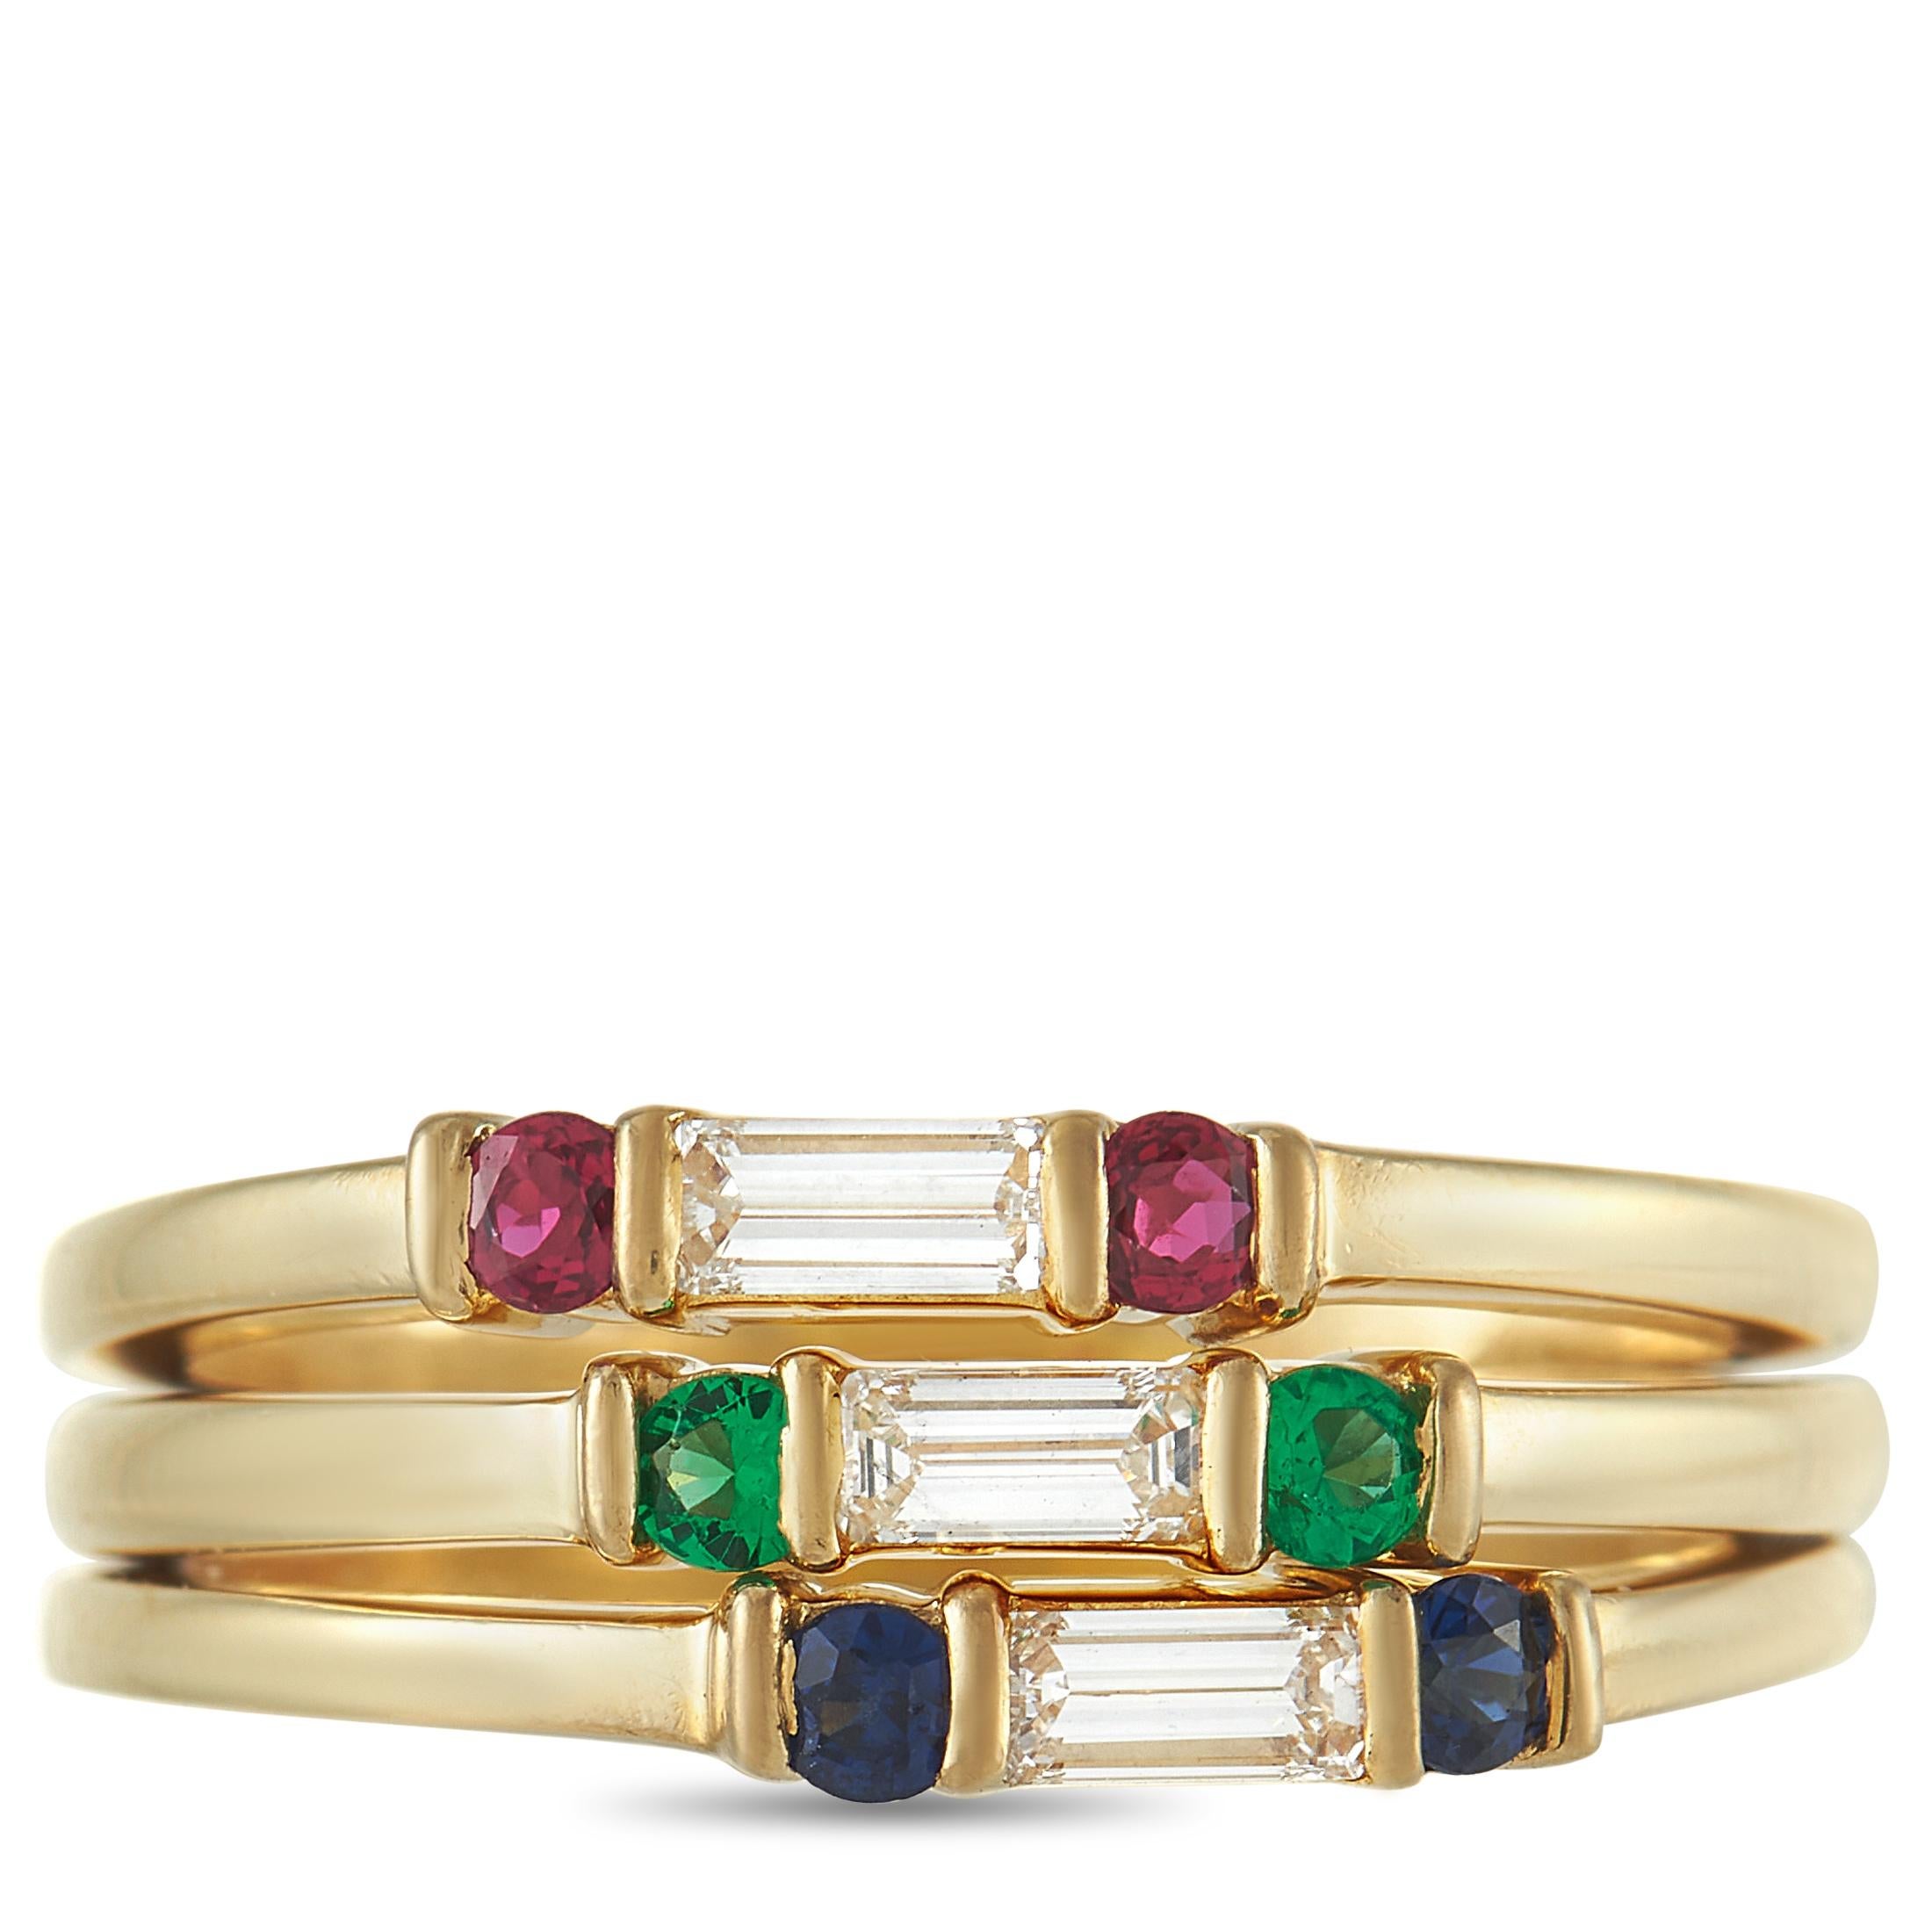 Round Cut Tiffany & Co. 18K Yellow Gold 0.35 Ct Diamond, Ruby, Sapphire, and Emerald Ring